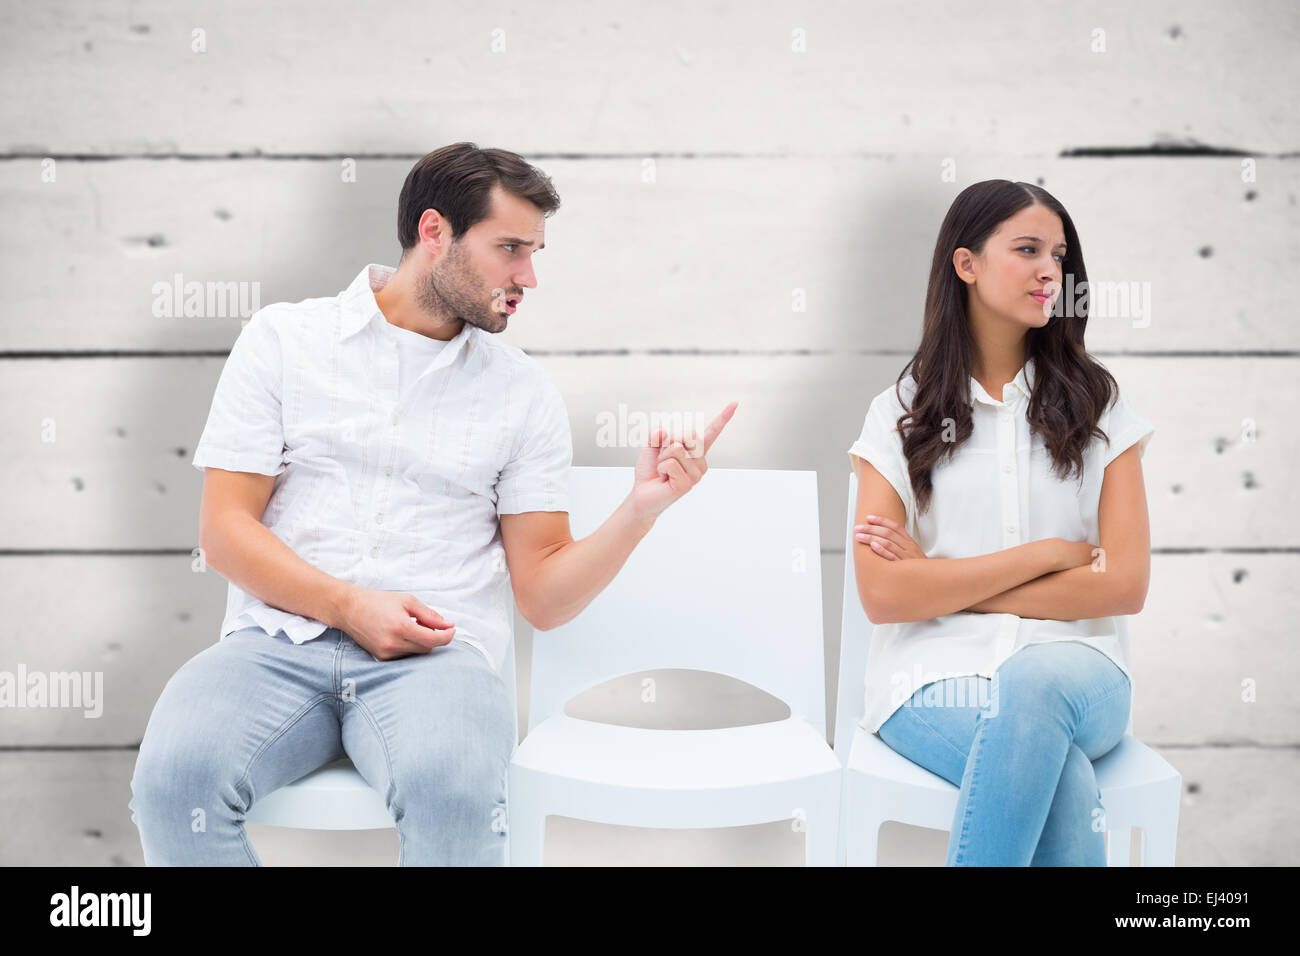 Composite image of man pleading with angry girlfriend Stock Photo